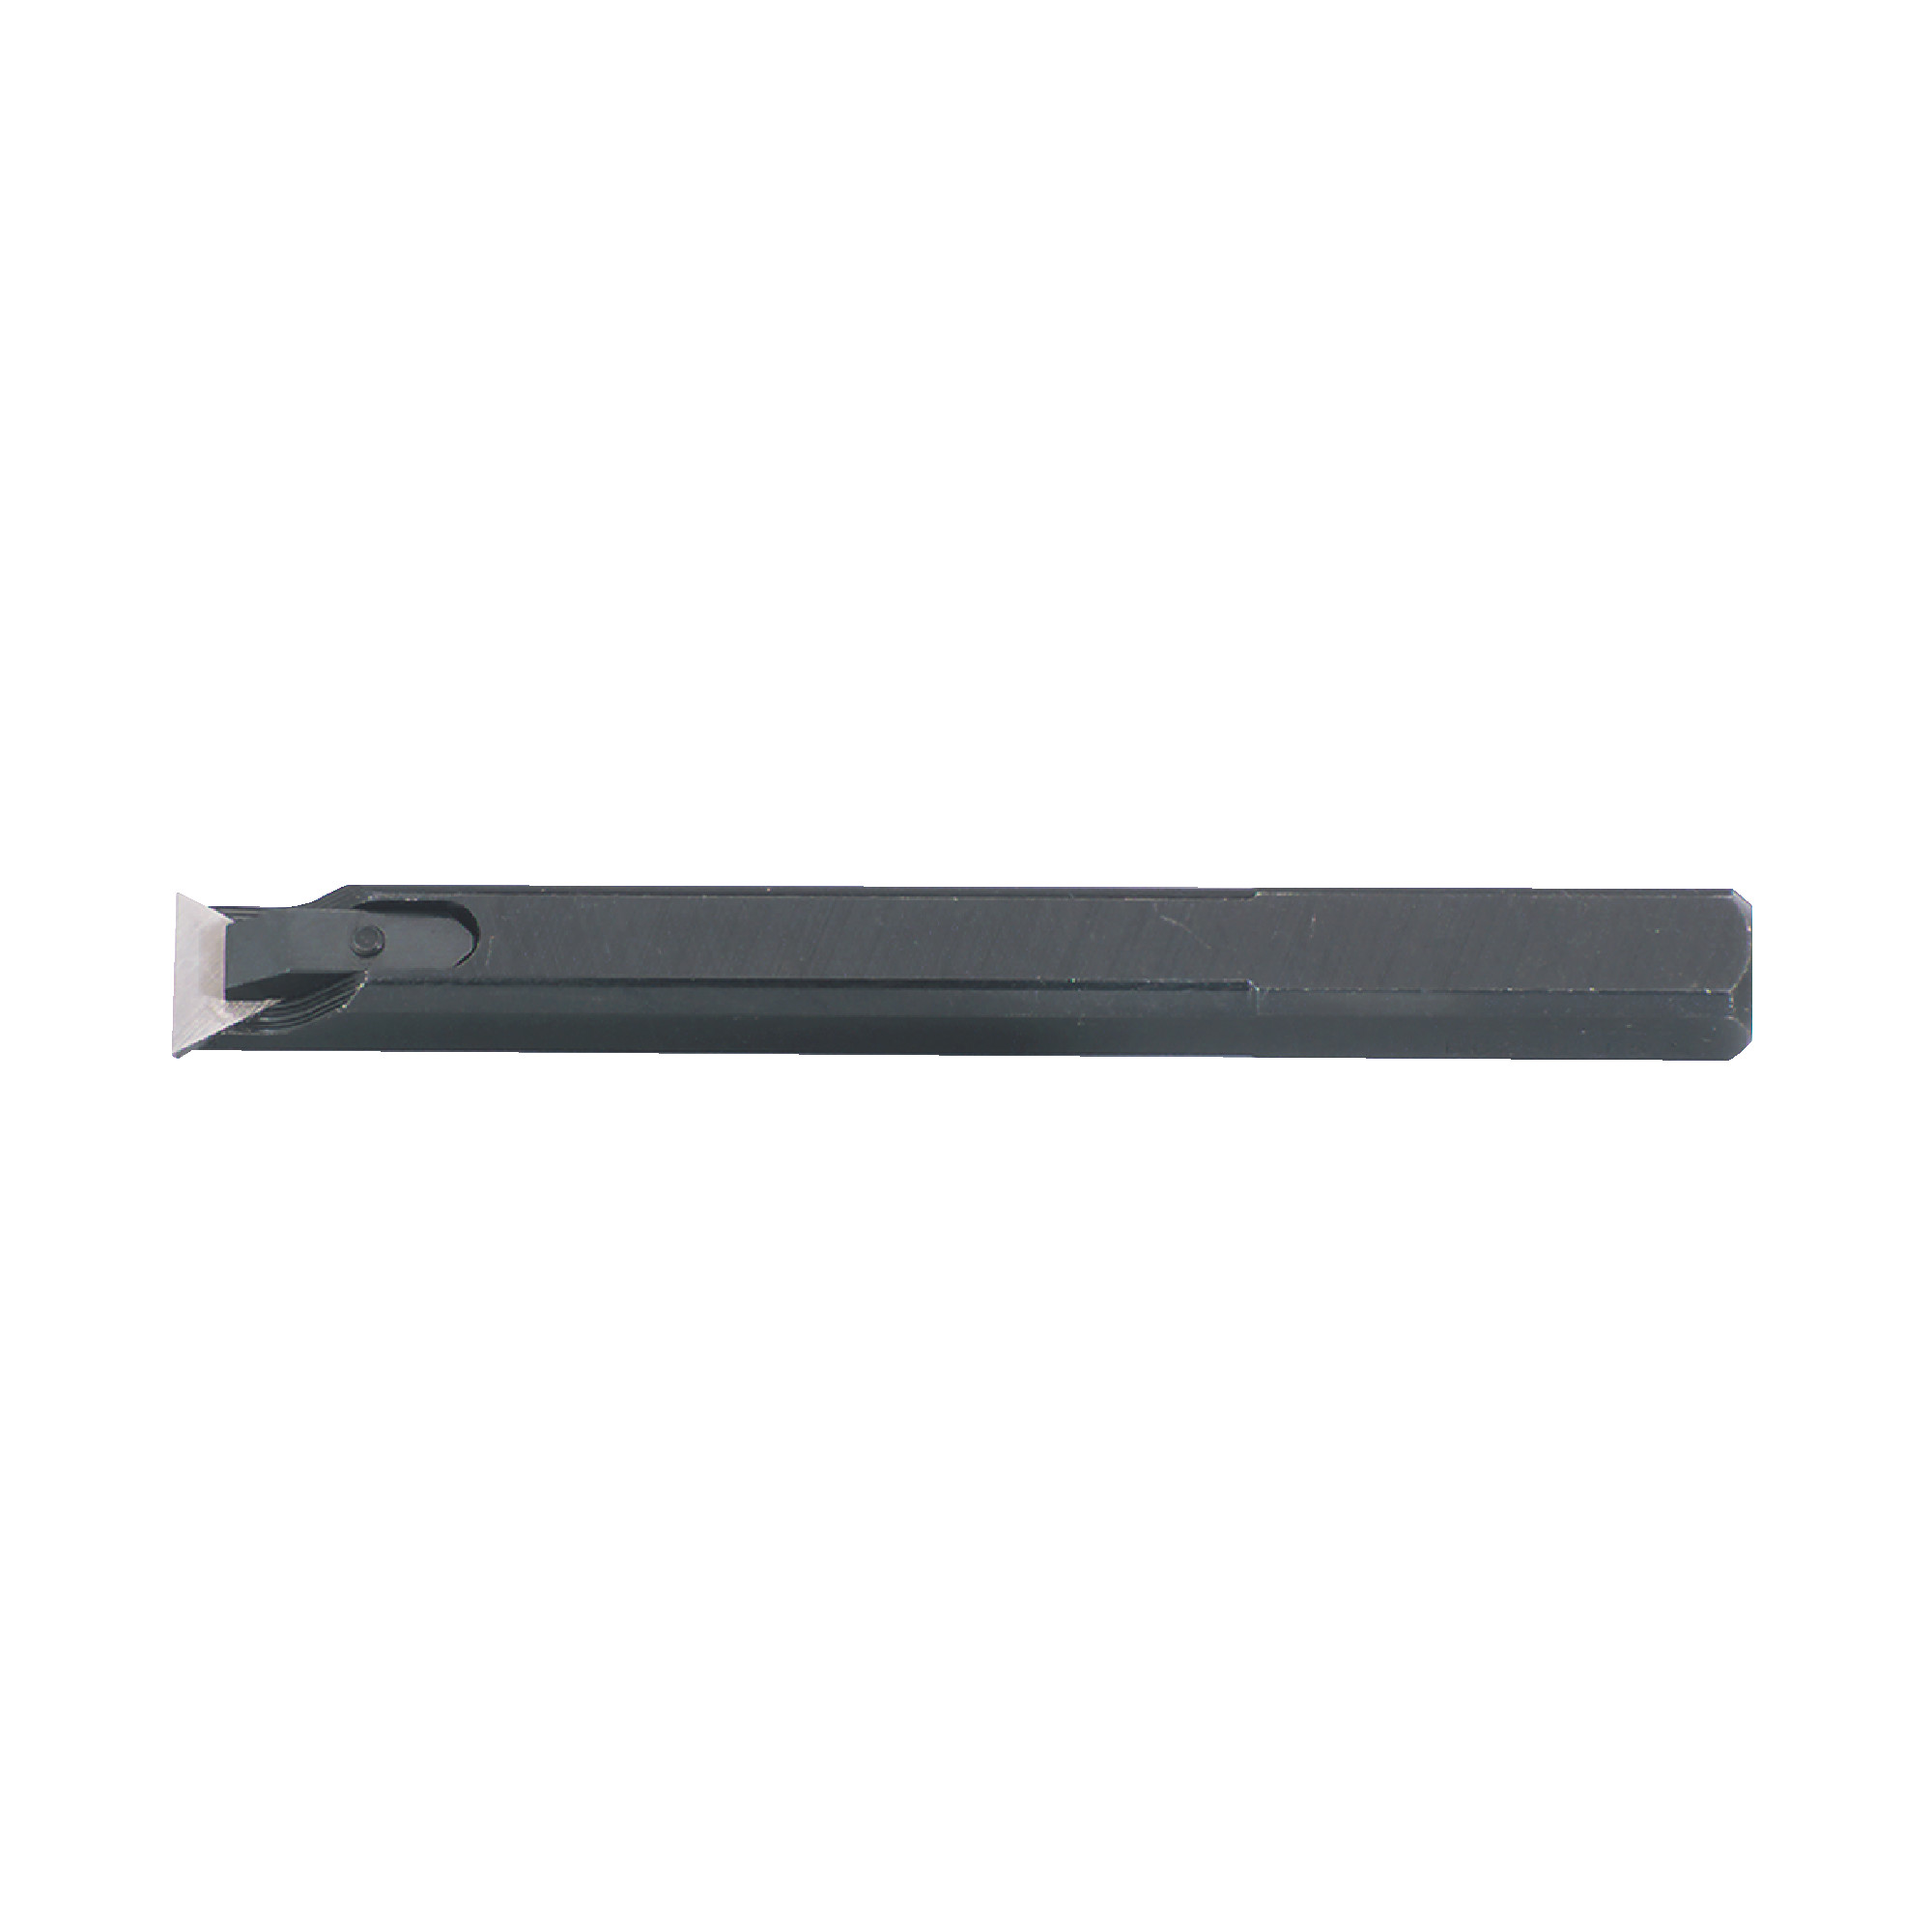 ROUSE - A375L Boring Bar / 3/4" Shank / 2.25" Length of Cut / TPEE73_ Inserts / Right Hand